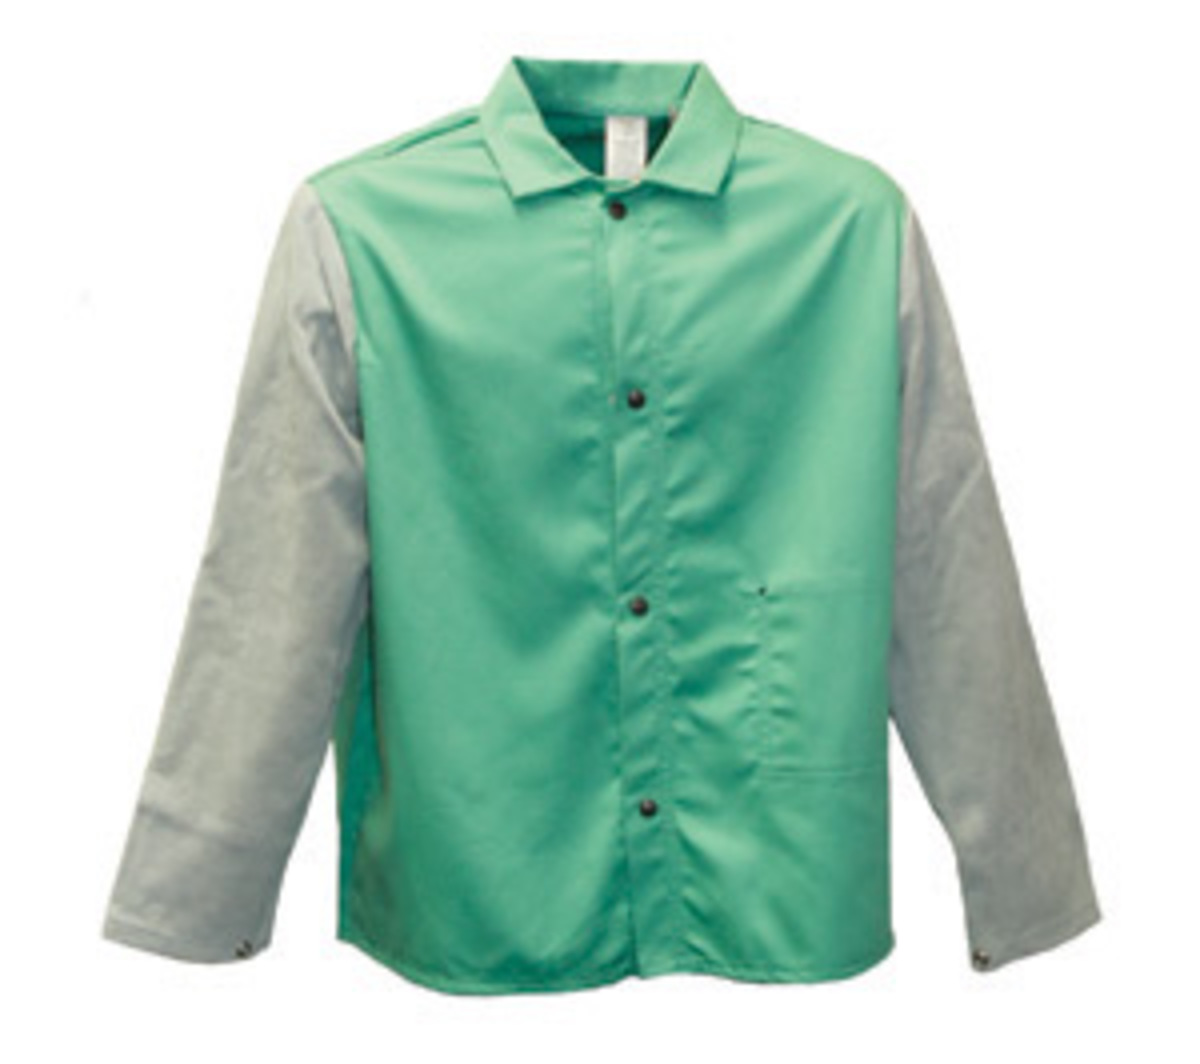 Stanco Safety Products™ Small Green Cotton Leather Sleeves Flame Resistant Welding Jacket With Snap Closure